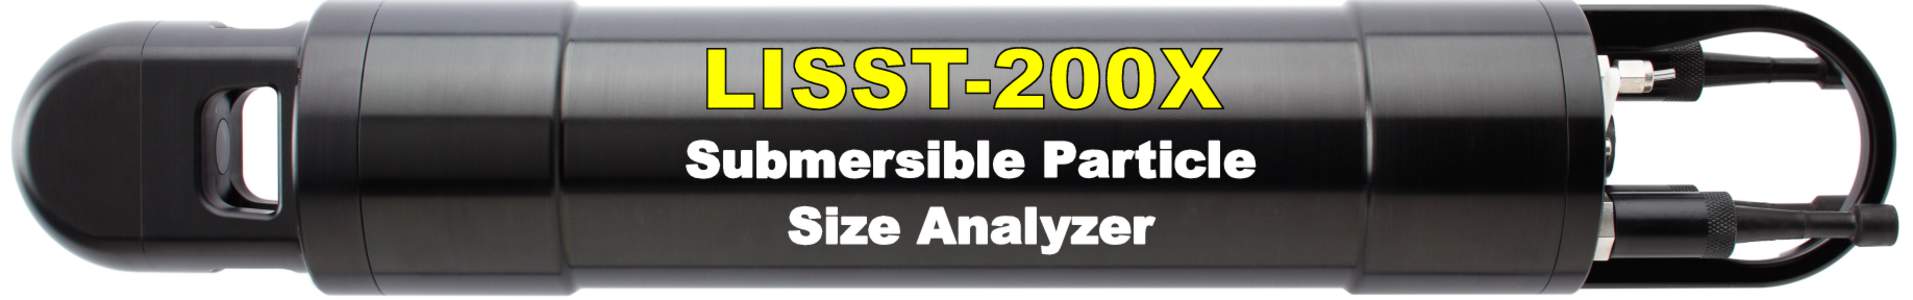 Submersible Particle Size Analyzer LISST-200X  Next Generation Submersible Particle Size Analyzer